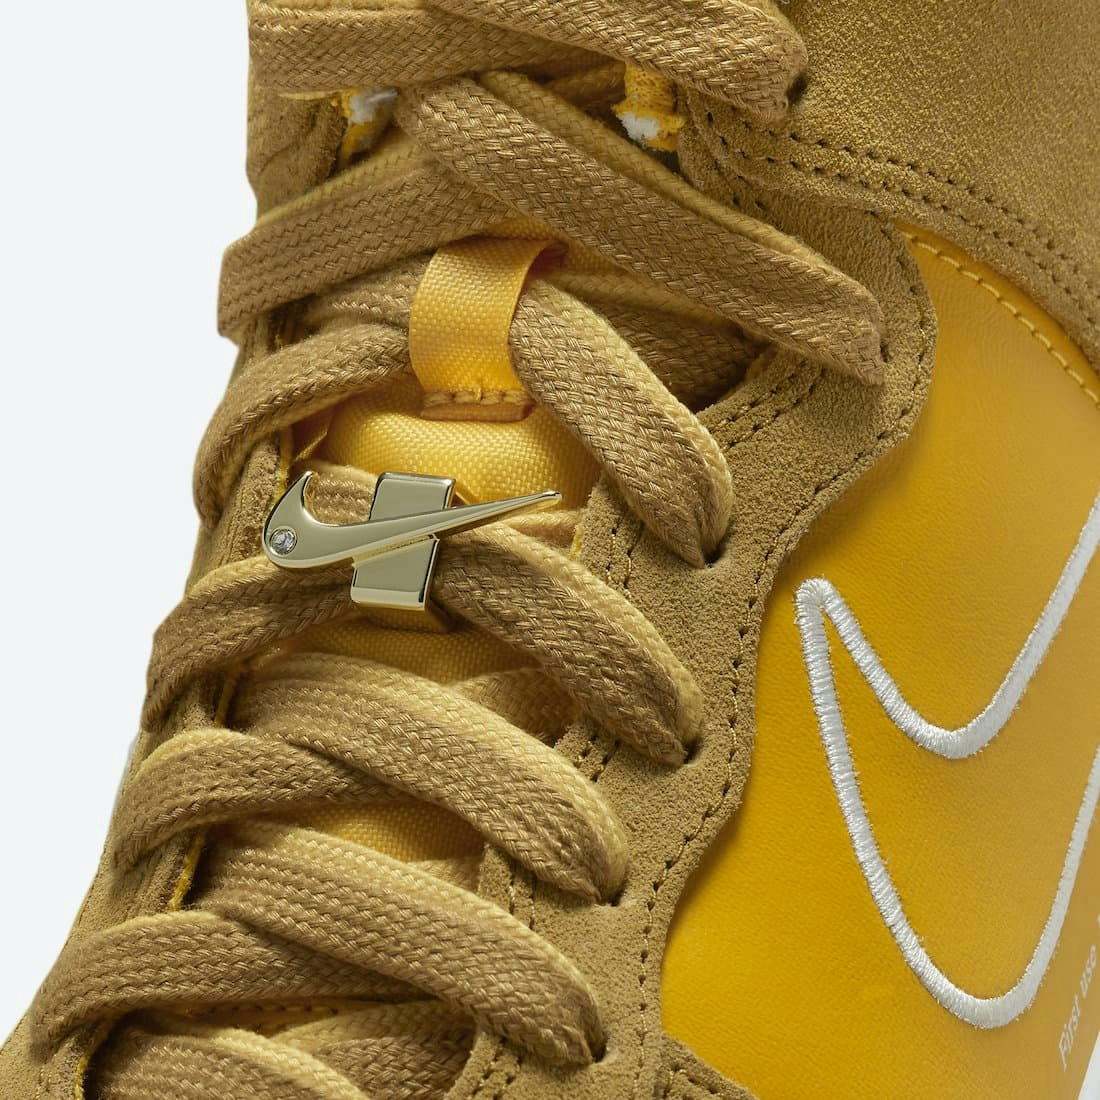 Nike Dunk High “First Use” (University Gold)